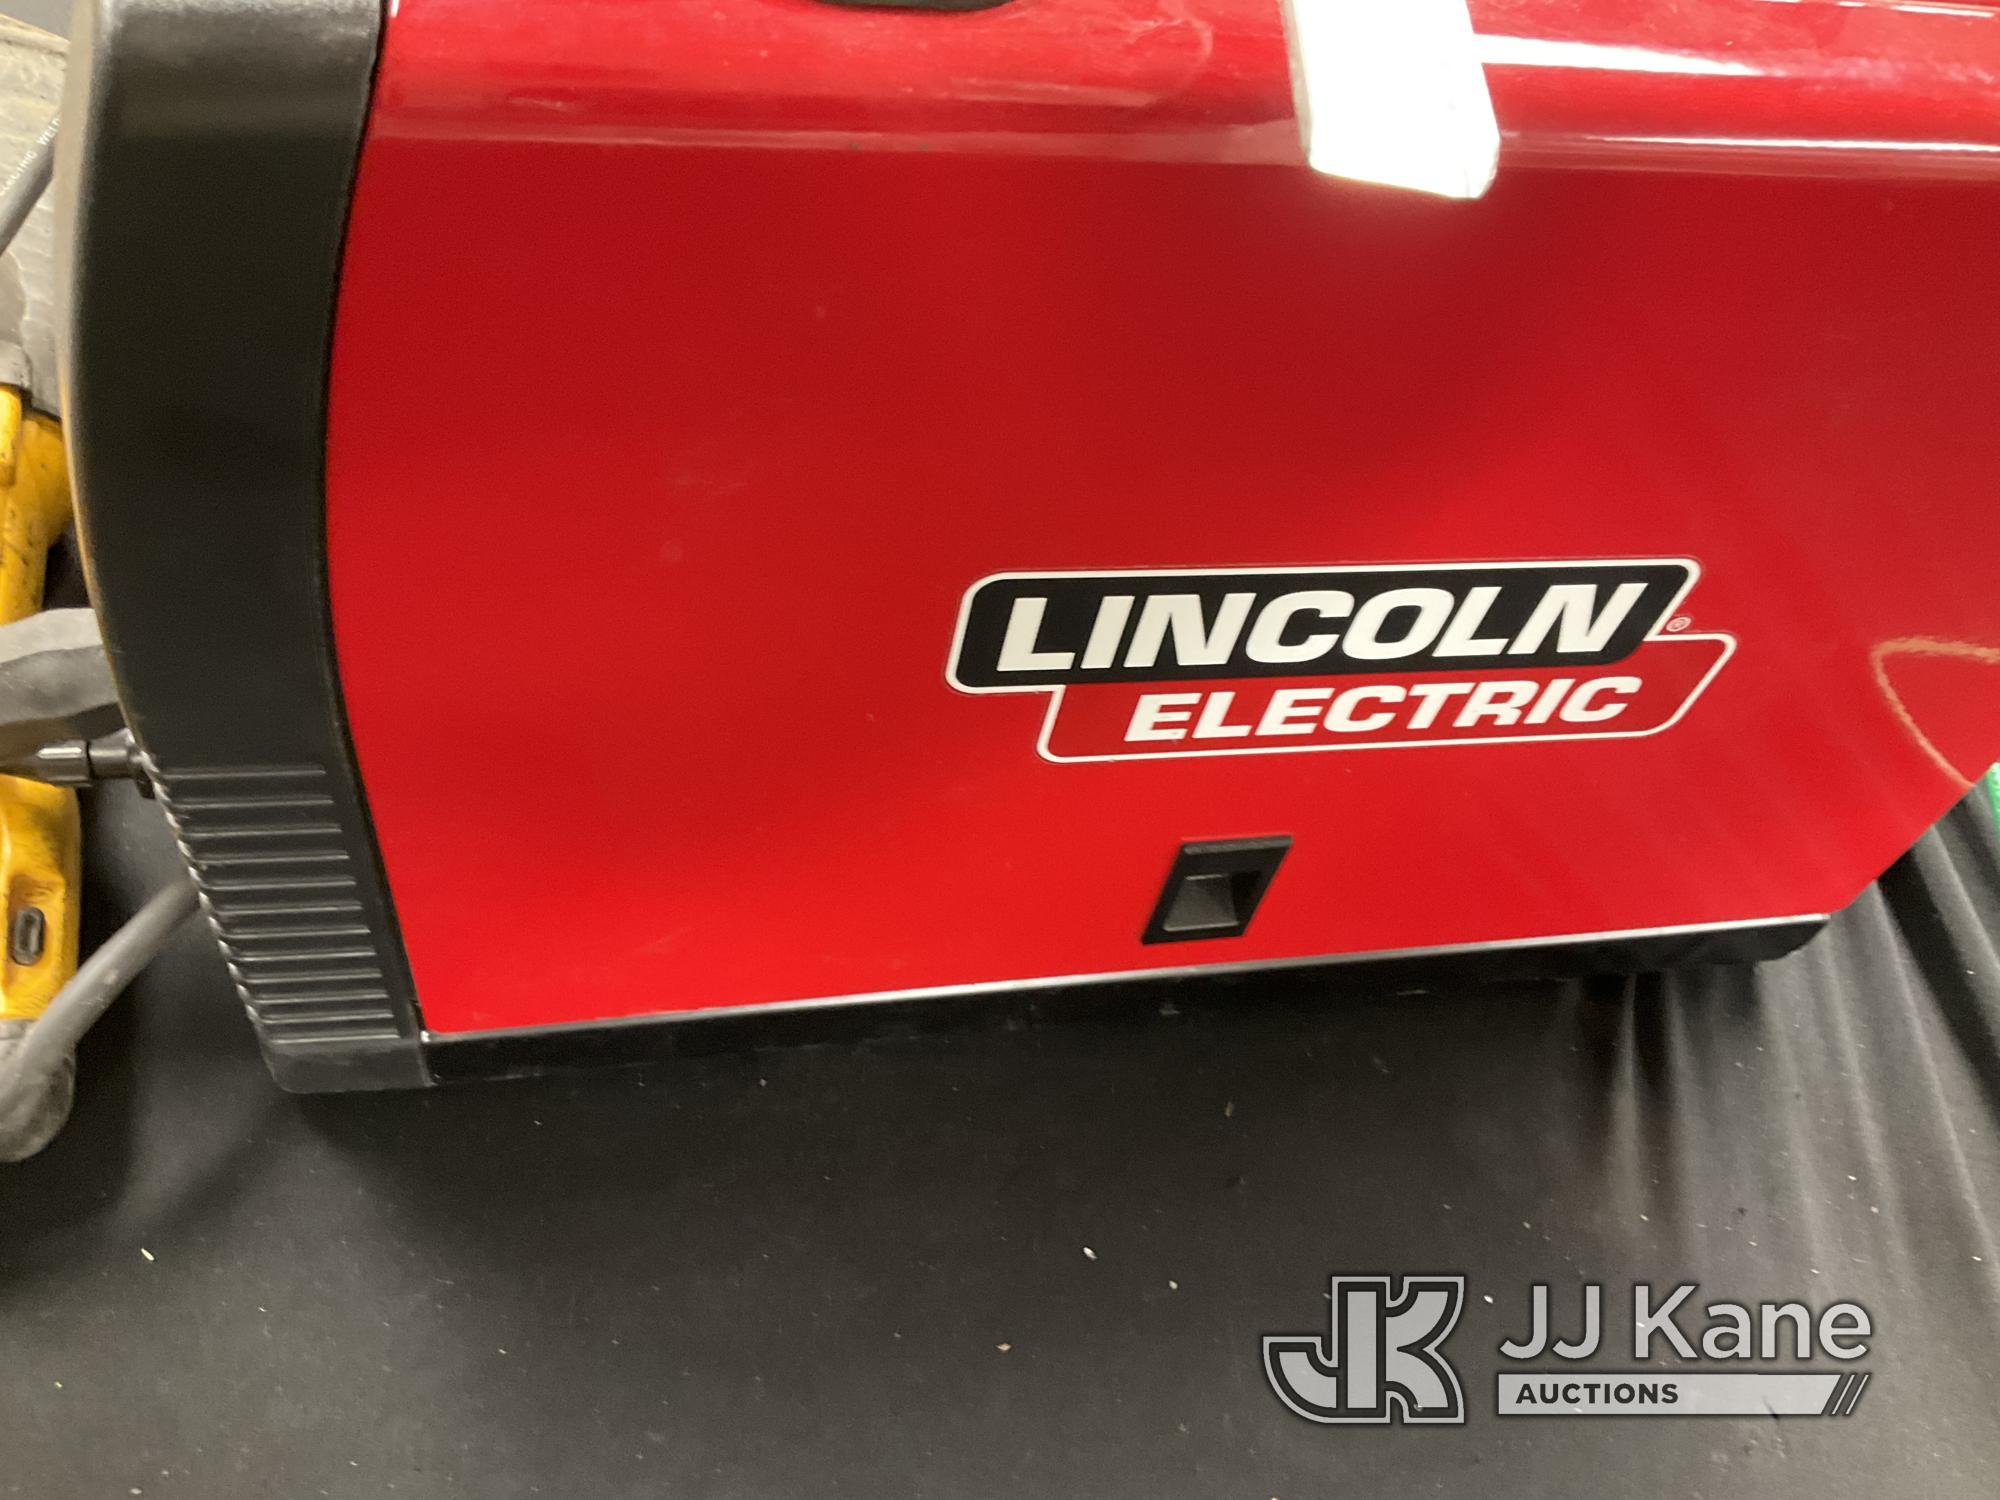 (Jurupa Valley, CA) Lincoln Electric Welded Used